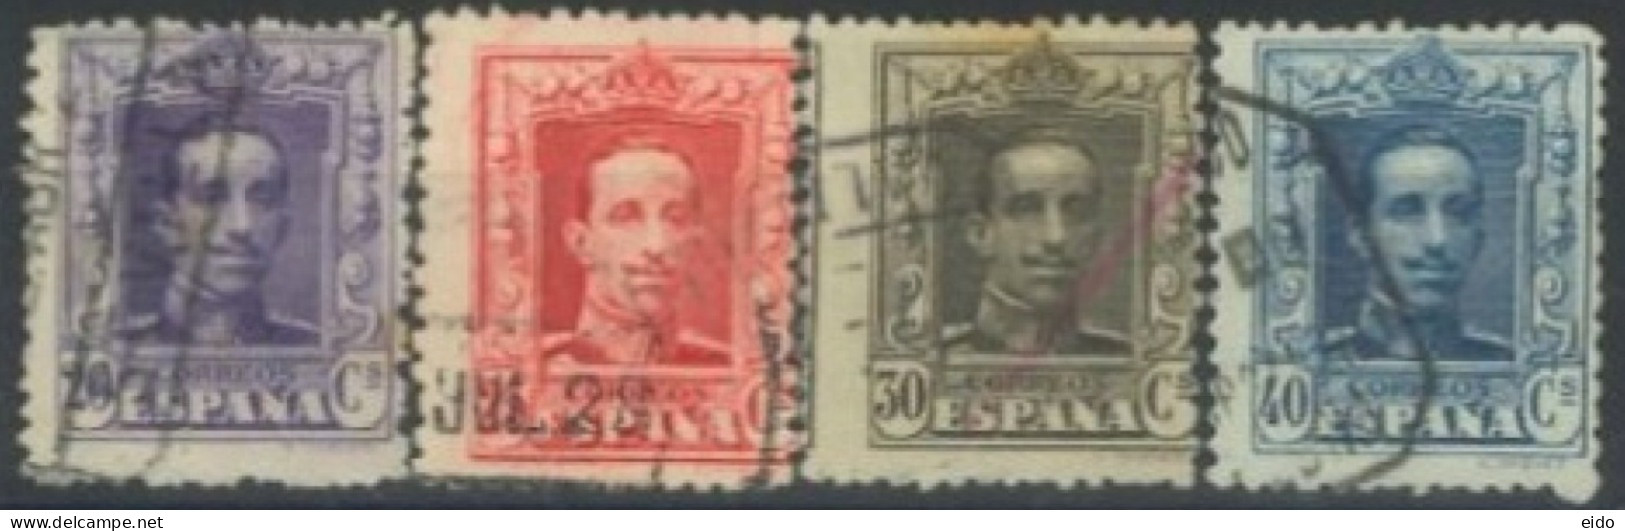 SPAIN, 1922/26, KING ALFONSO XIII STAMPS SET OF 4 # 337/40, USED. - Gebraucht